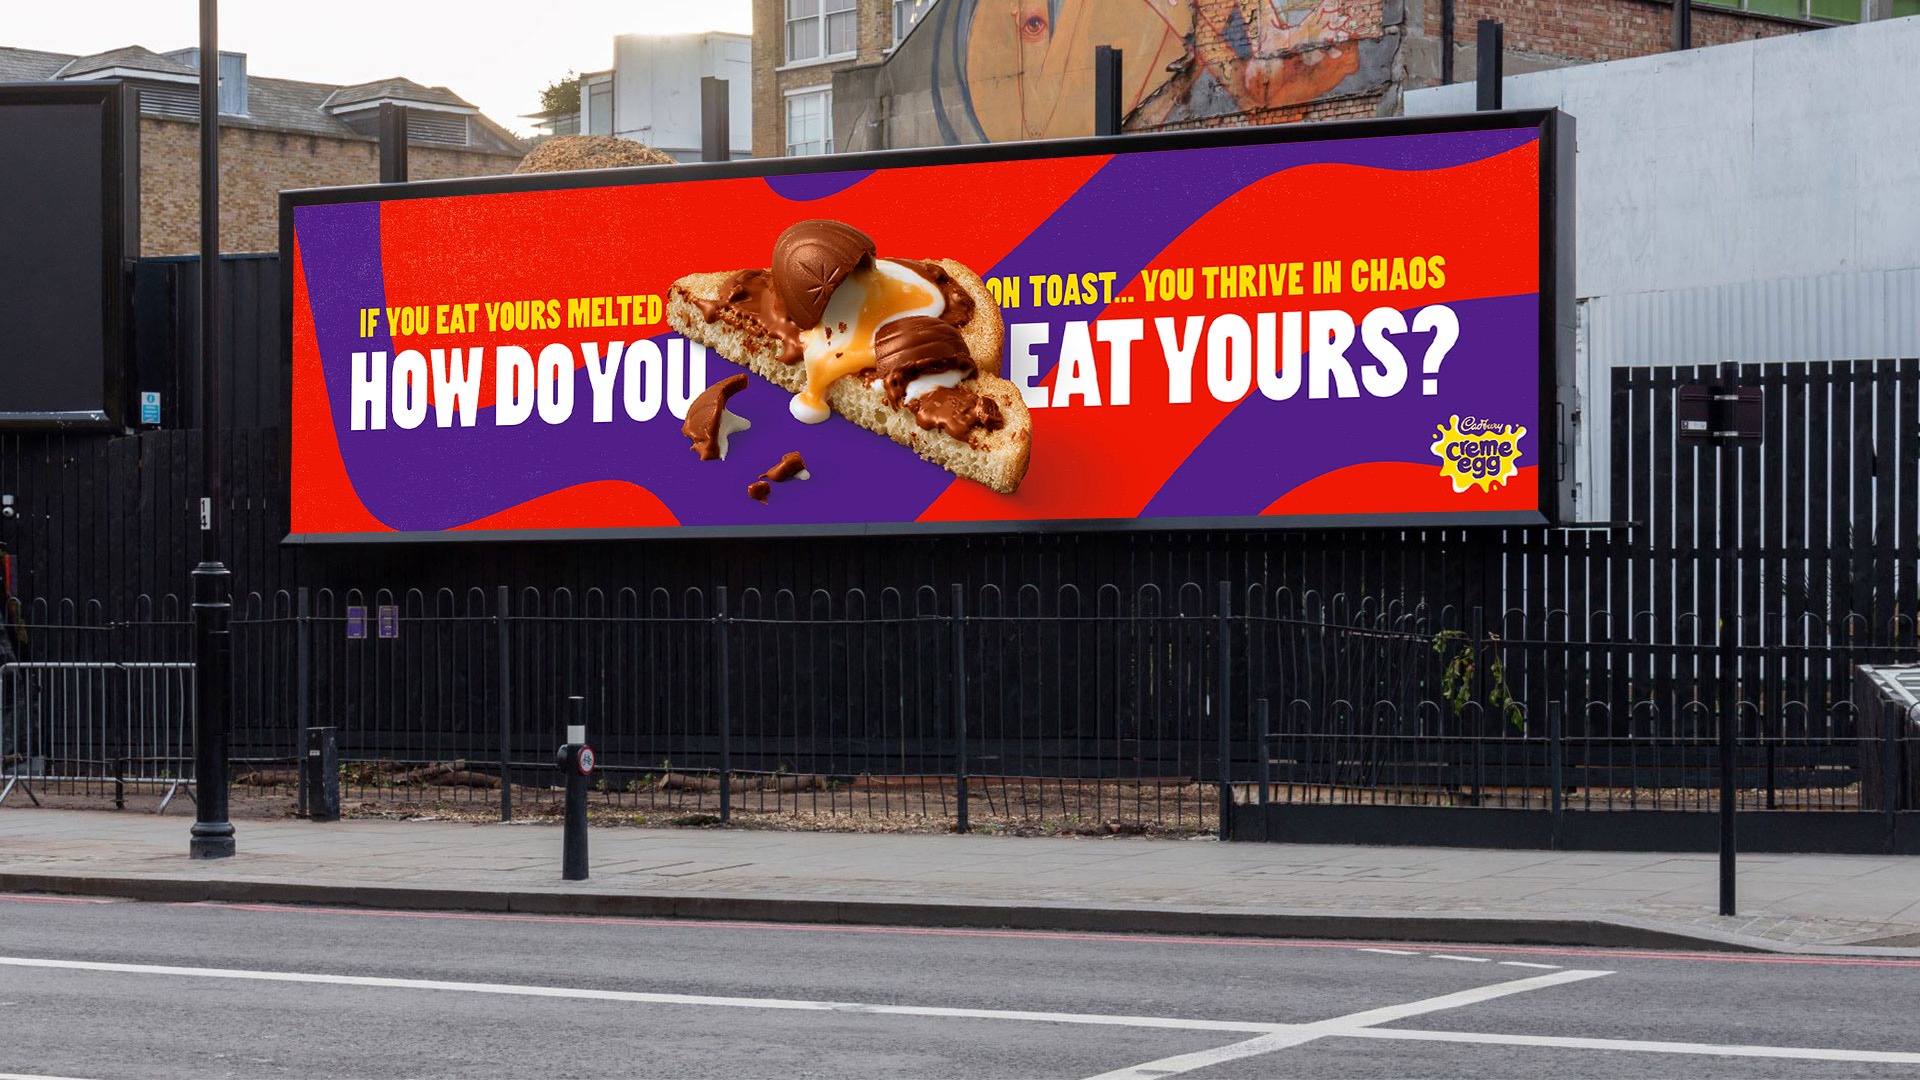 Cadbury Creme Egg brings back ‘How do you eat yours?’ tagline for the first time in 20 years